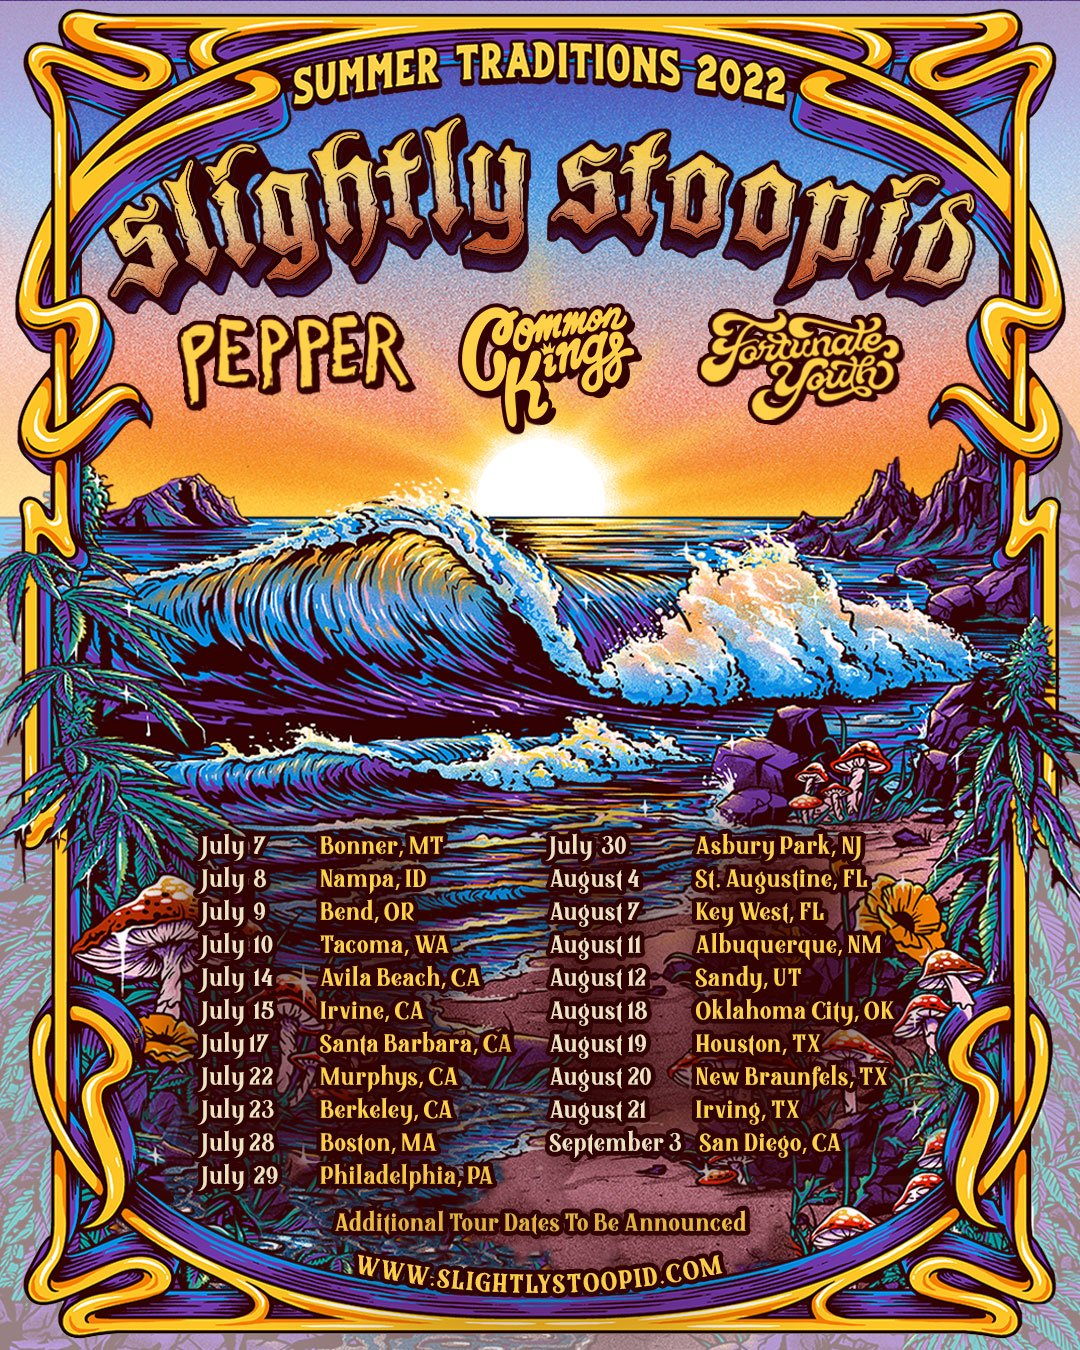 Summer Traditions 2022 Tour — Slightly Stoopid